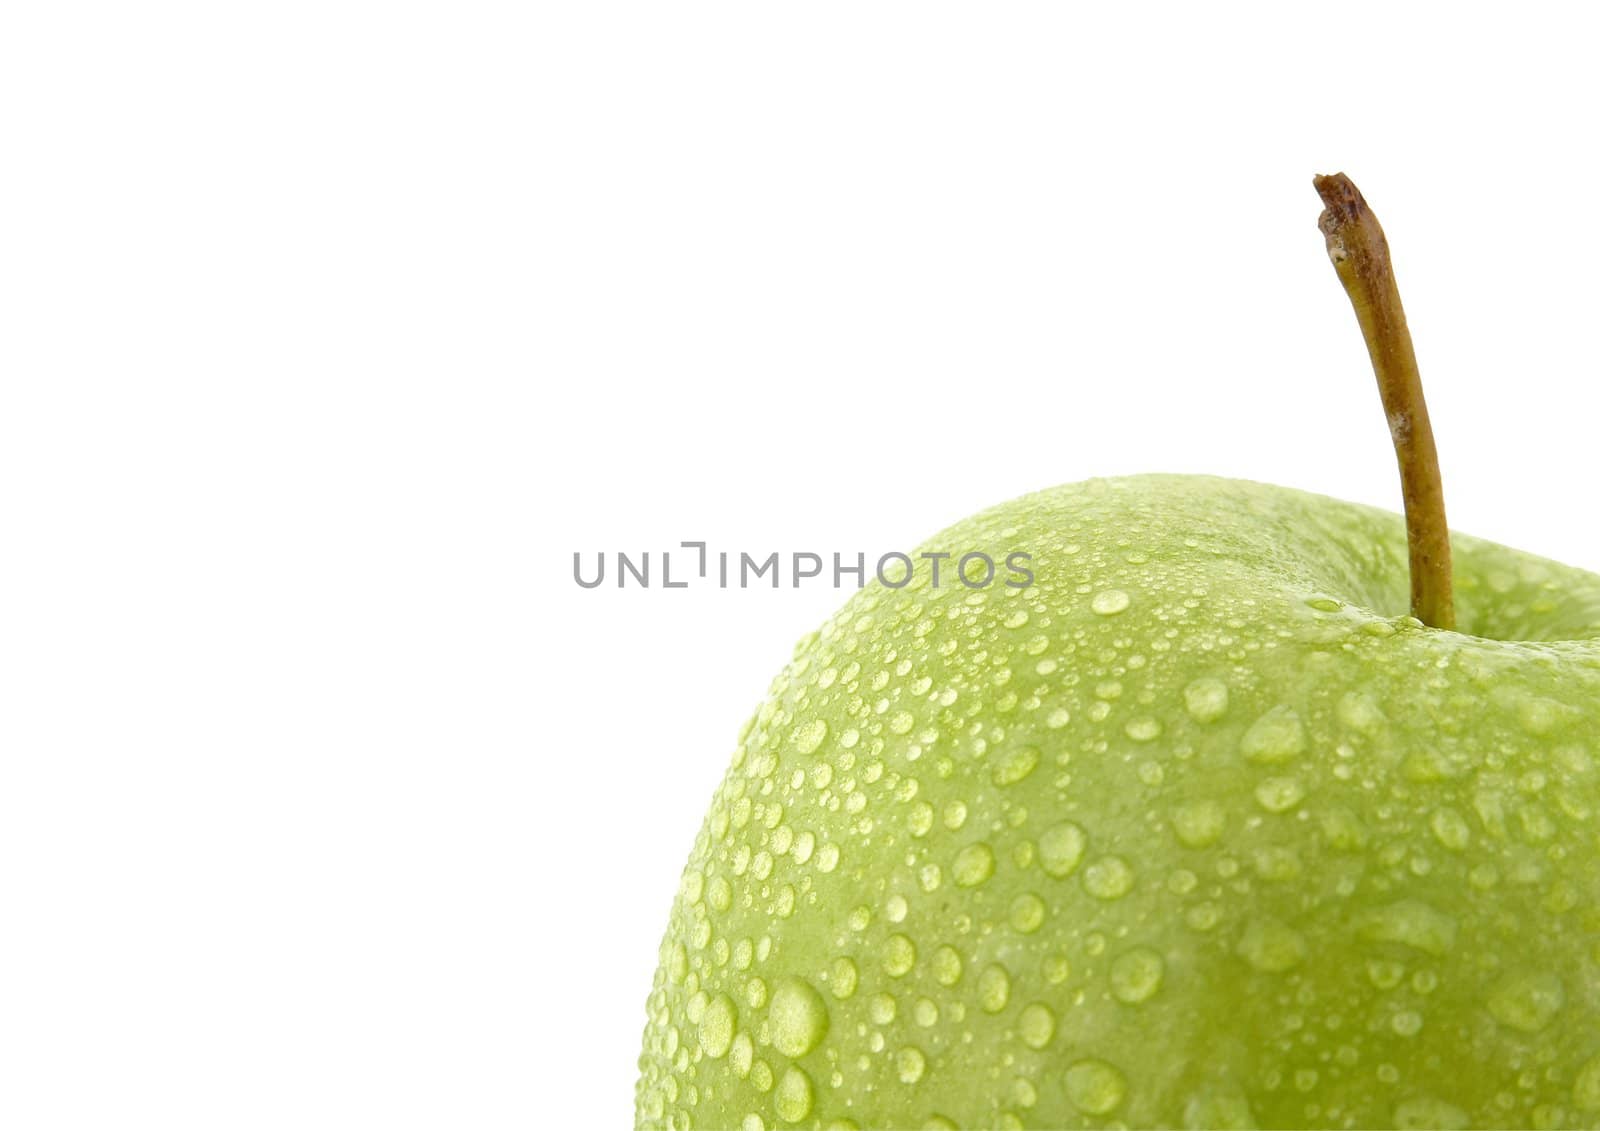 Green apple with water drops